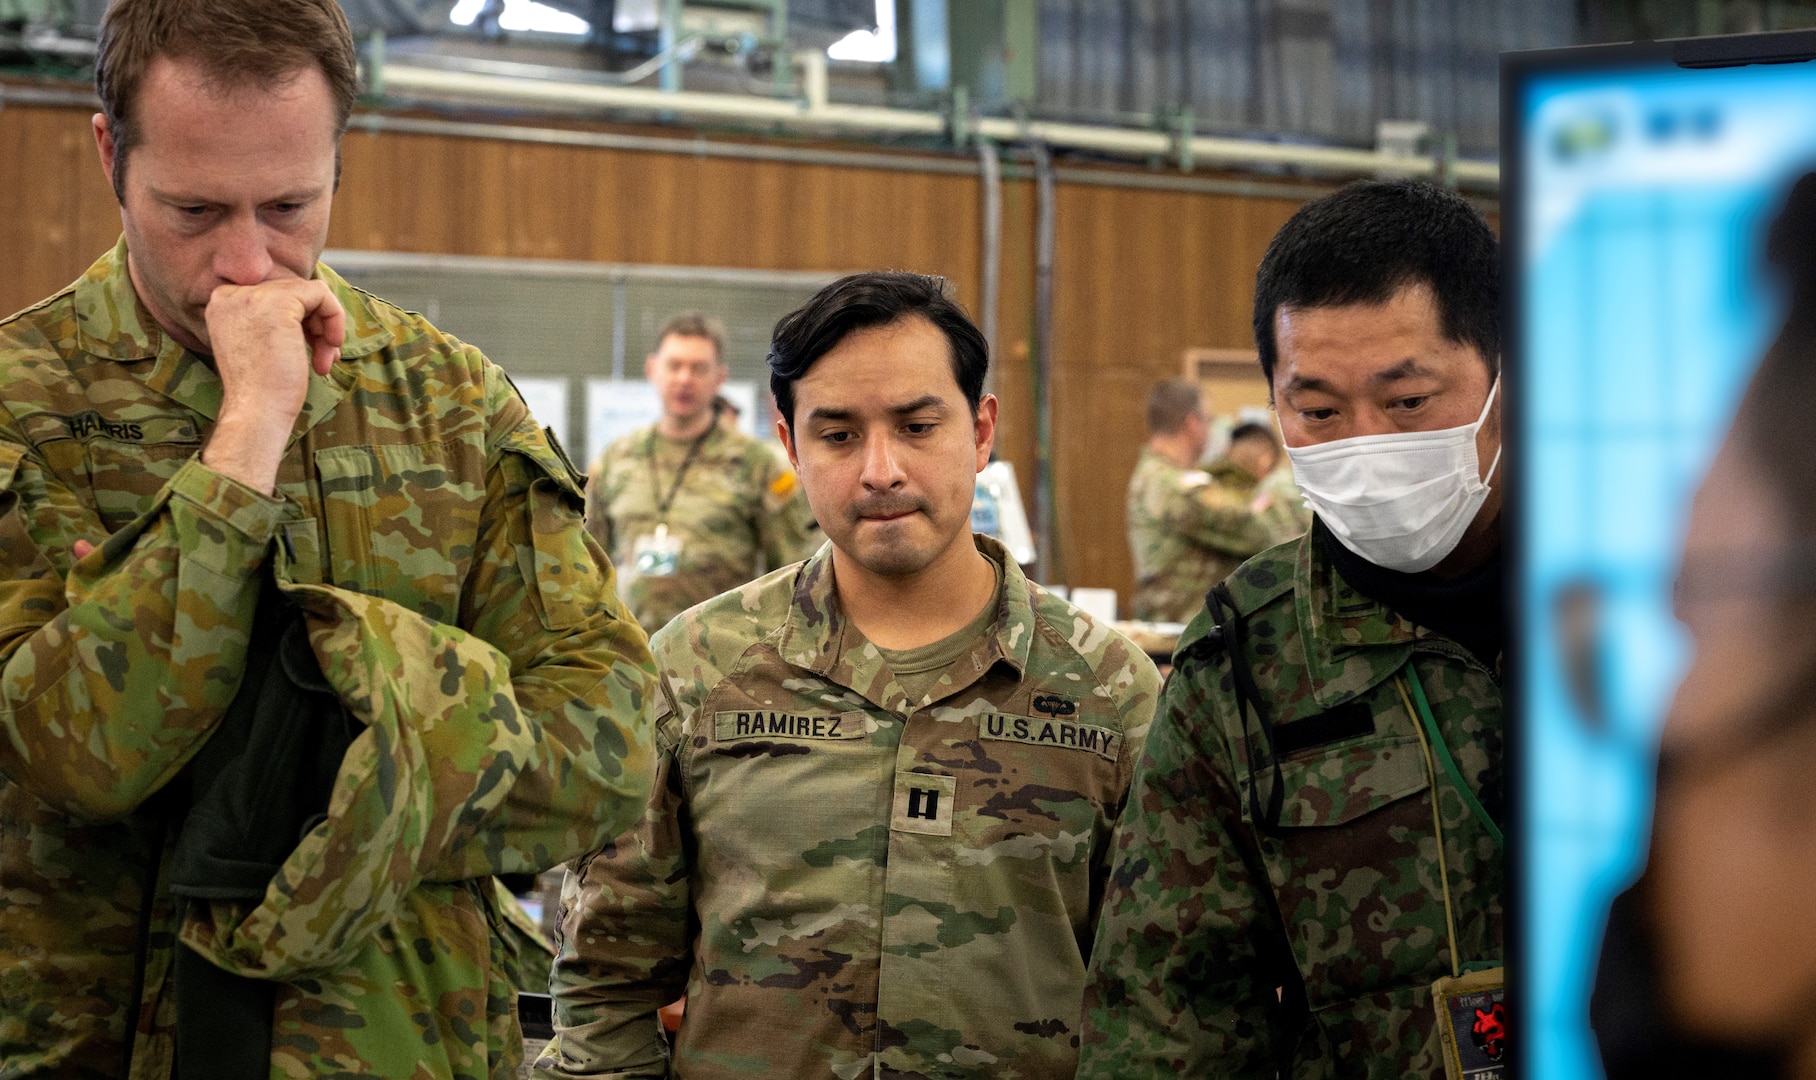 Japanese, U.S., and Australian participants take part in a joint rehearsal during Yama Sakura 85 at Camp Higashi-Chitose, Japan, Dec. 11, 2023. As a part of U.S. Army Pacific's Operation Pathways, the 43rd iteration of Yama Sakura exercise, YS-85, is the first U.S. Army, Japan Ground Self-Defense Force, and Australian Army command post exercise based in Japan. This trilateral exercise was an opportunity to hone interoperability between nations and work together toward a common goal. (U.S. Army photo by Spc. Austin Robertson)